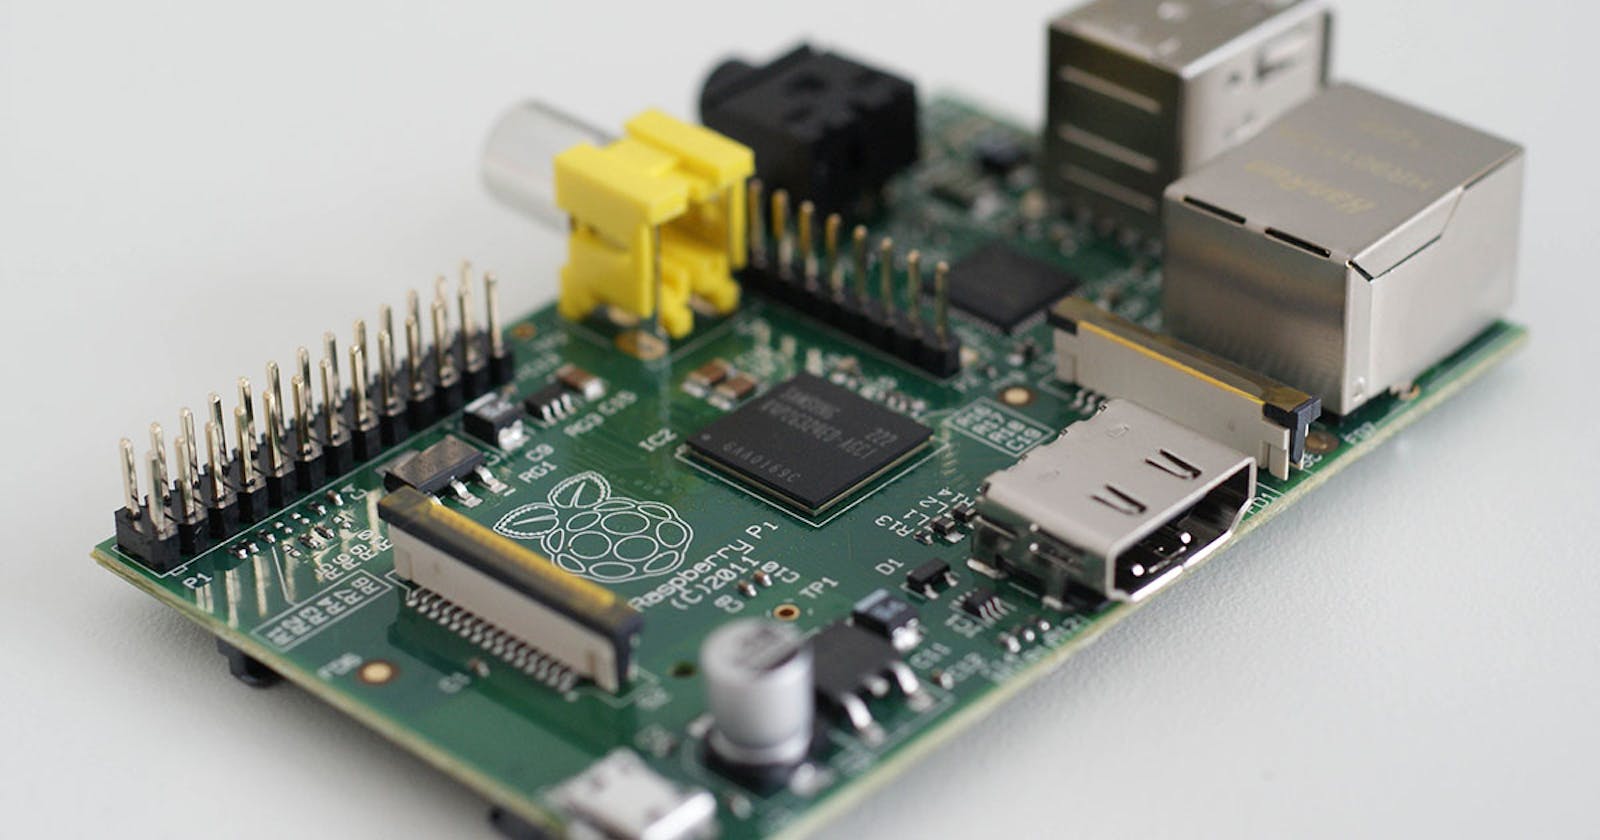 Oh, yeah, that Raspberry Pi thing I setup this blog for…